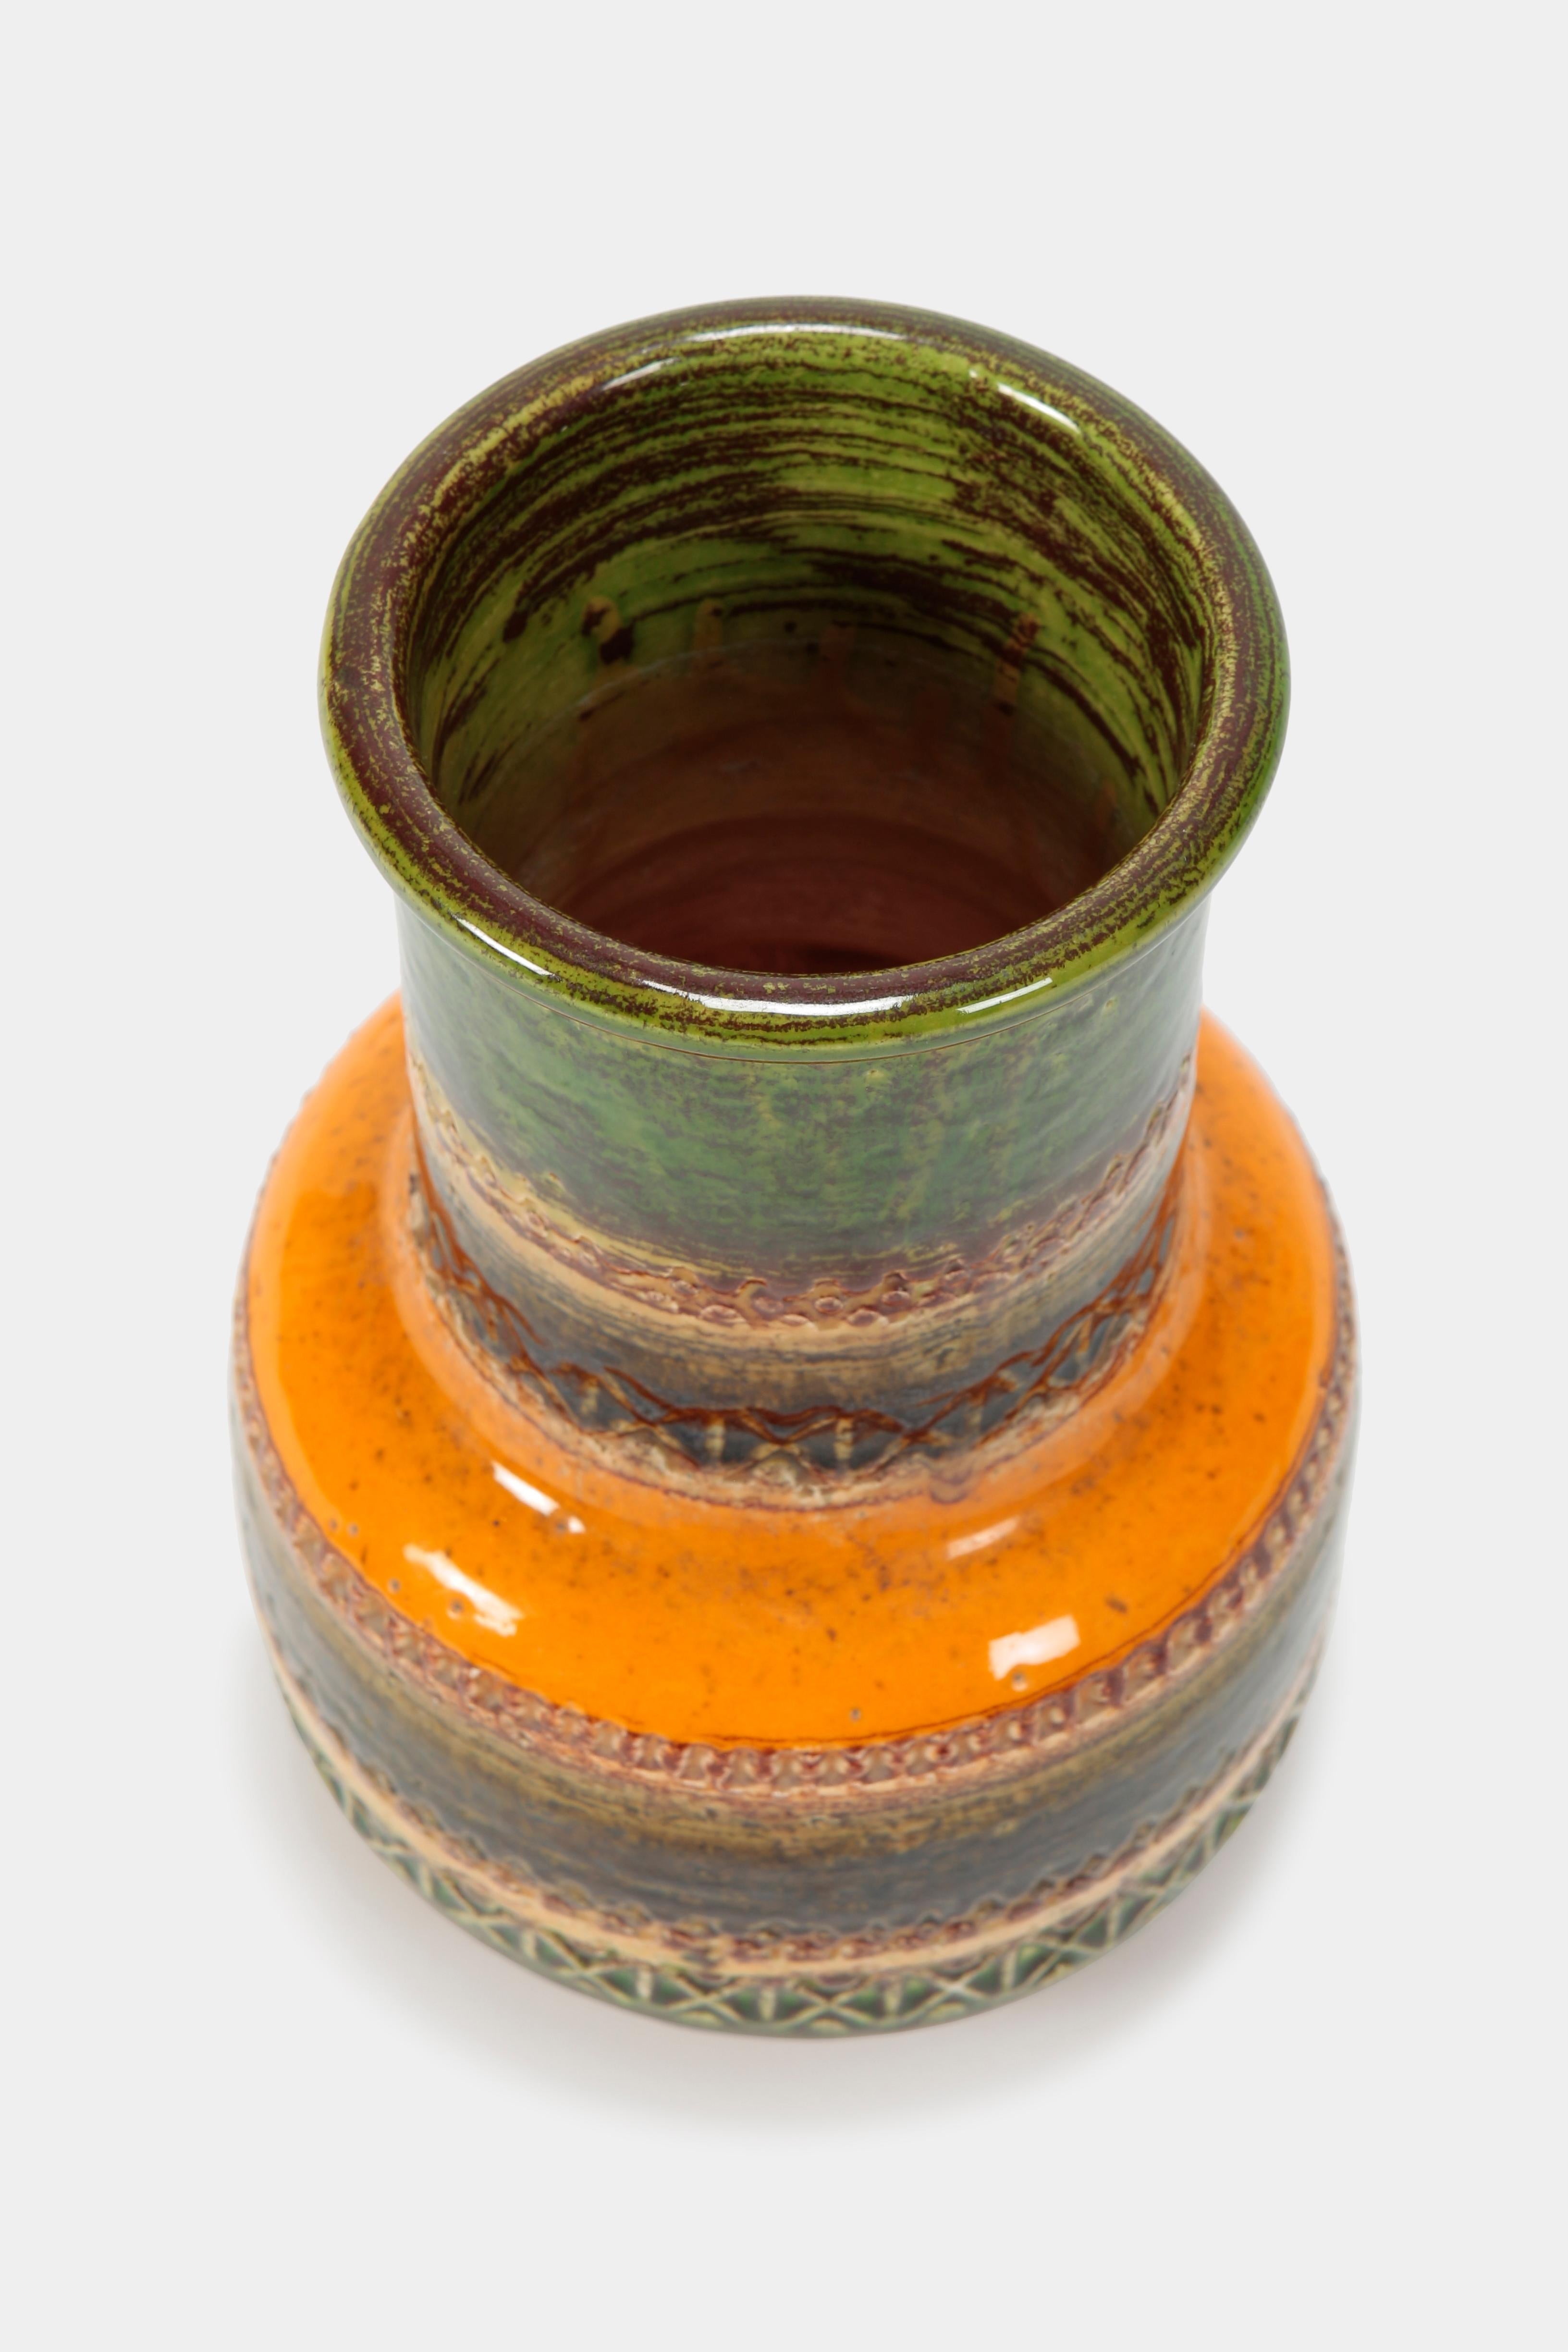 Aldo Londi Sahara vase manufactured by Bitossi in the 1960s in Italy. Handmade ceramic vase from Aldo Londi’s iconic “Sahara” collection. Brown glazed ceramics with engraved patterns. The gorgeous shades of browns and the geometric design of the